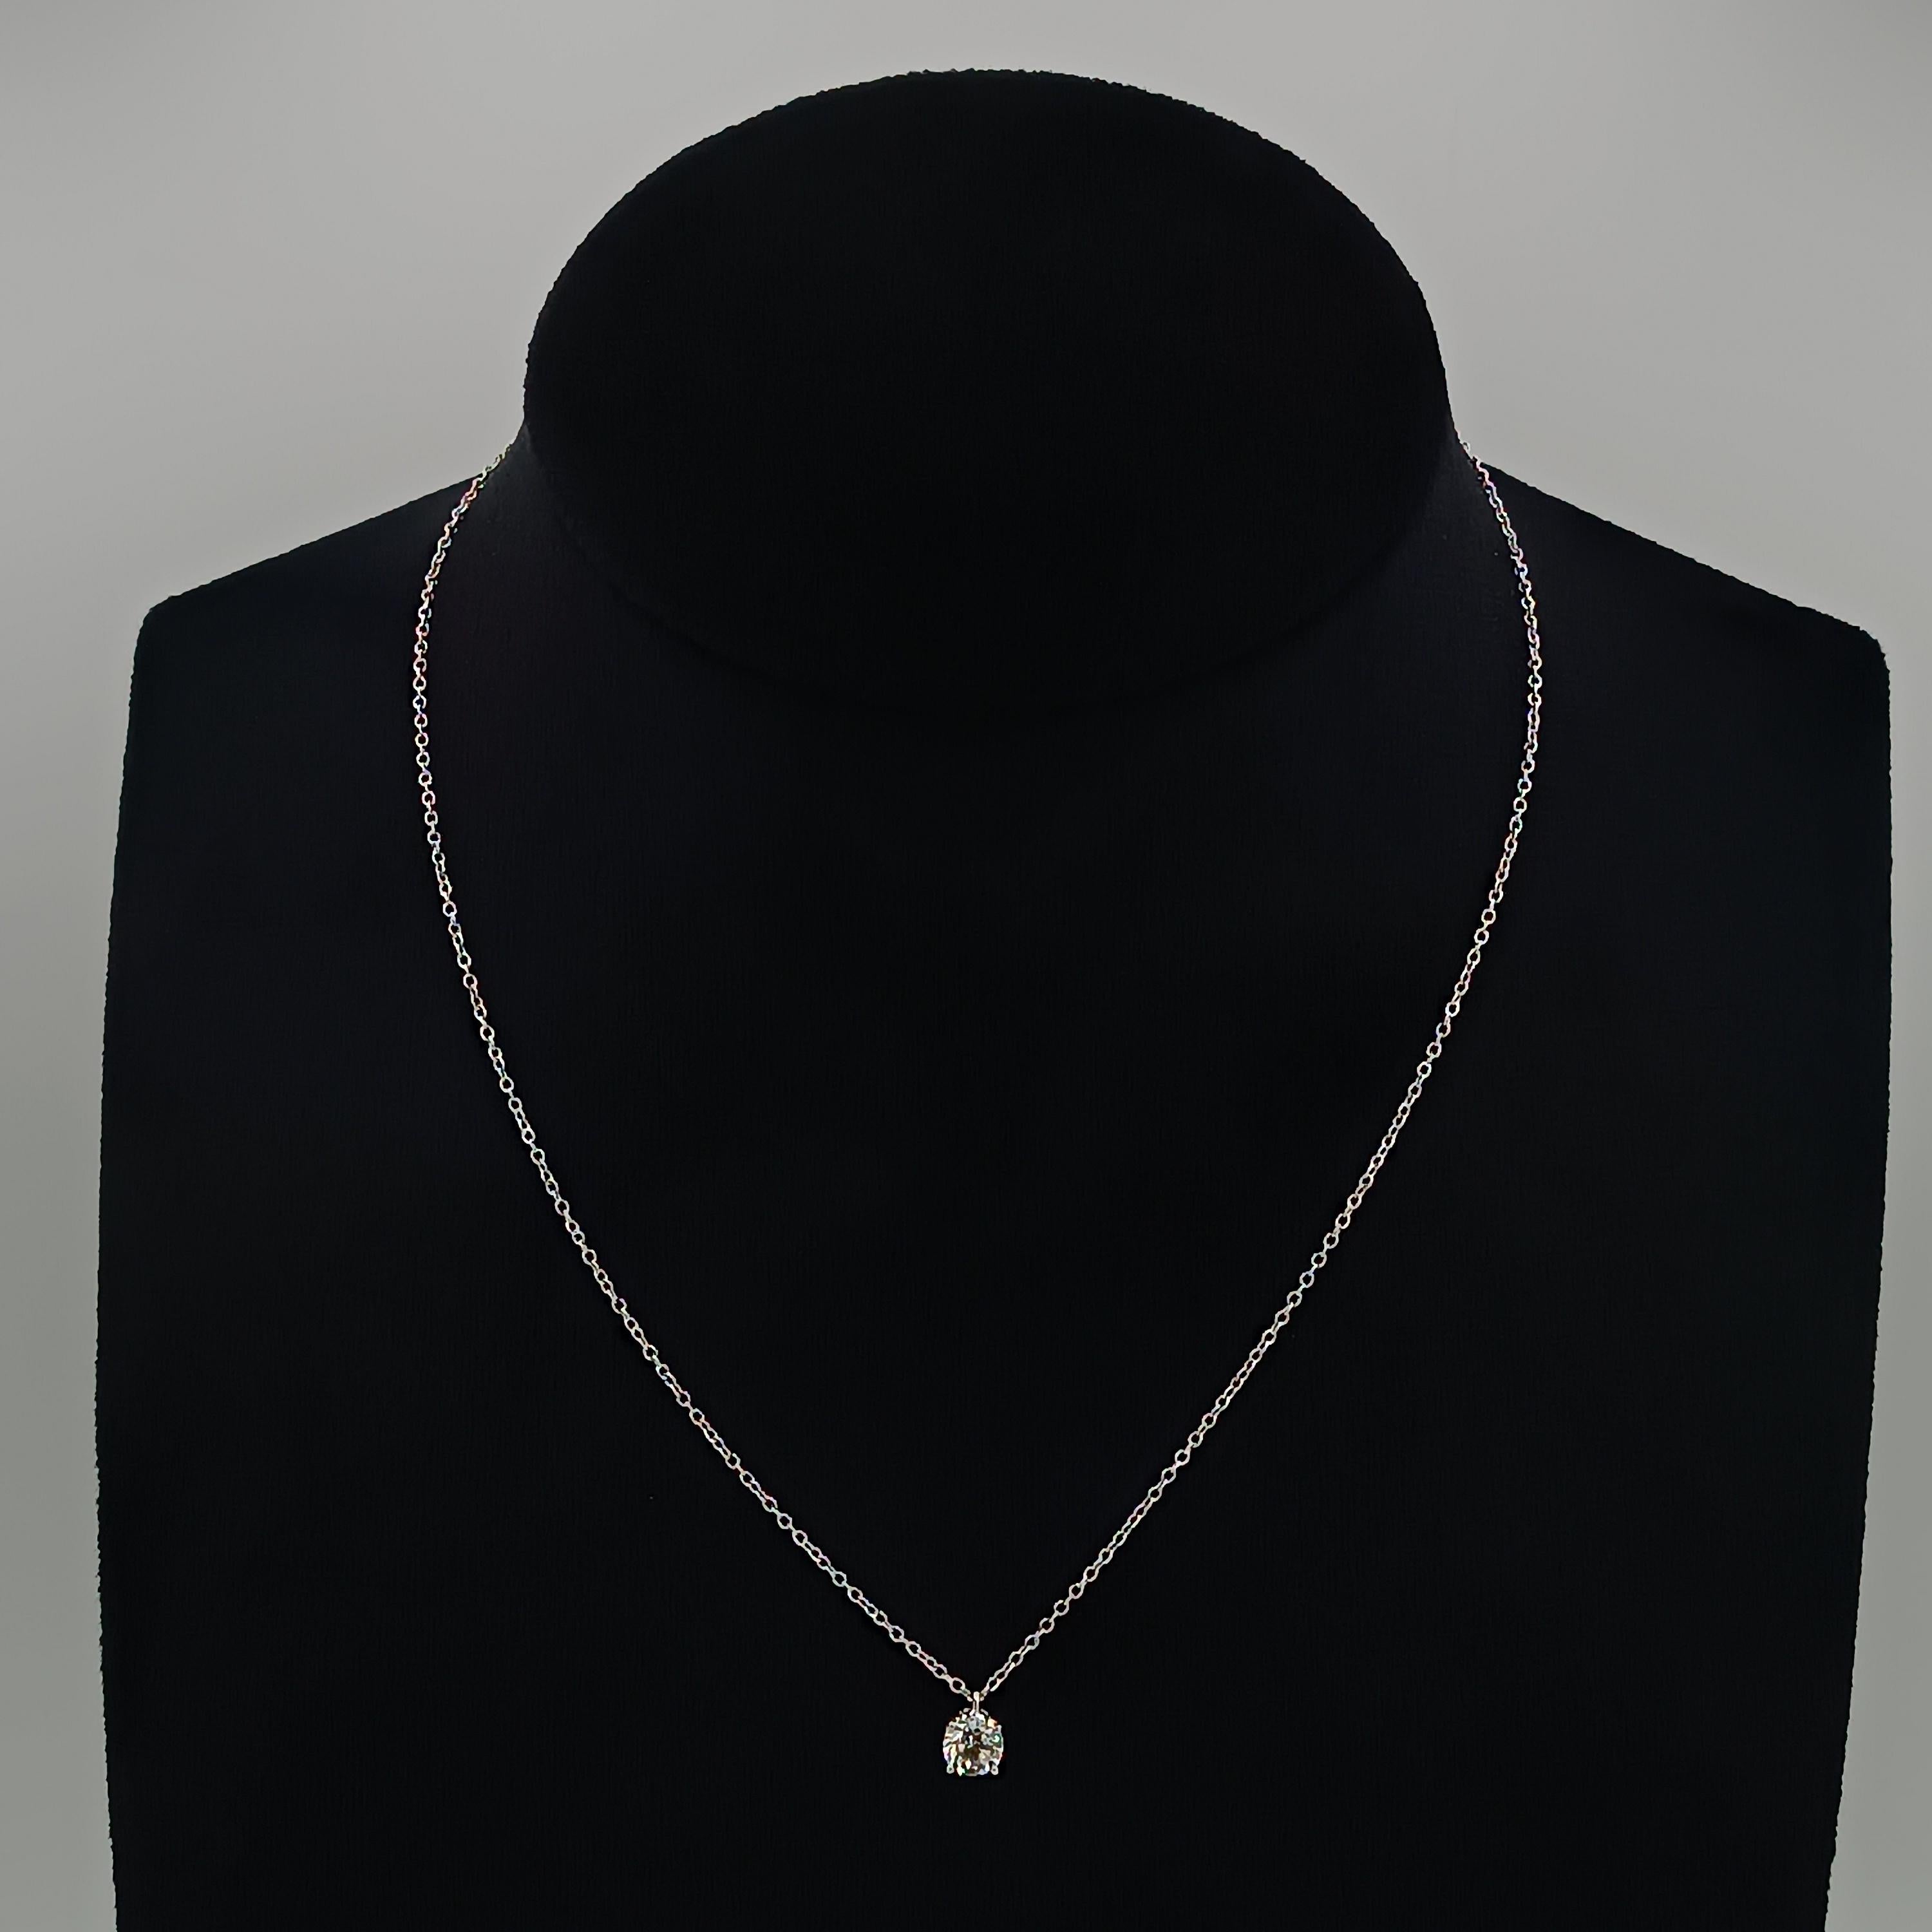 This timeless classic is all about the round brilliant cut stone, a magnificent 0.70 carat VS G color stone, mounted on a refined 18 carat white gold chain. the lenght of the necklace is 41 centimeters and the weight is 2.40 grams
any item of our